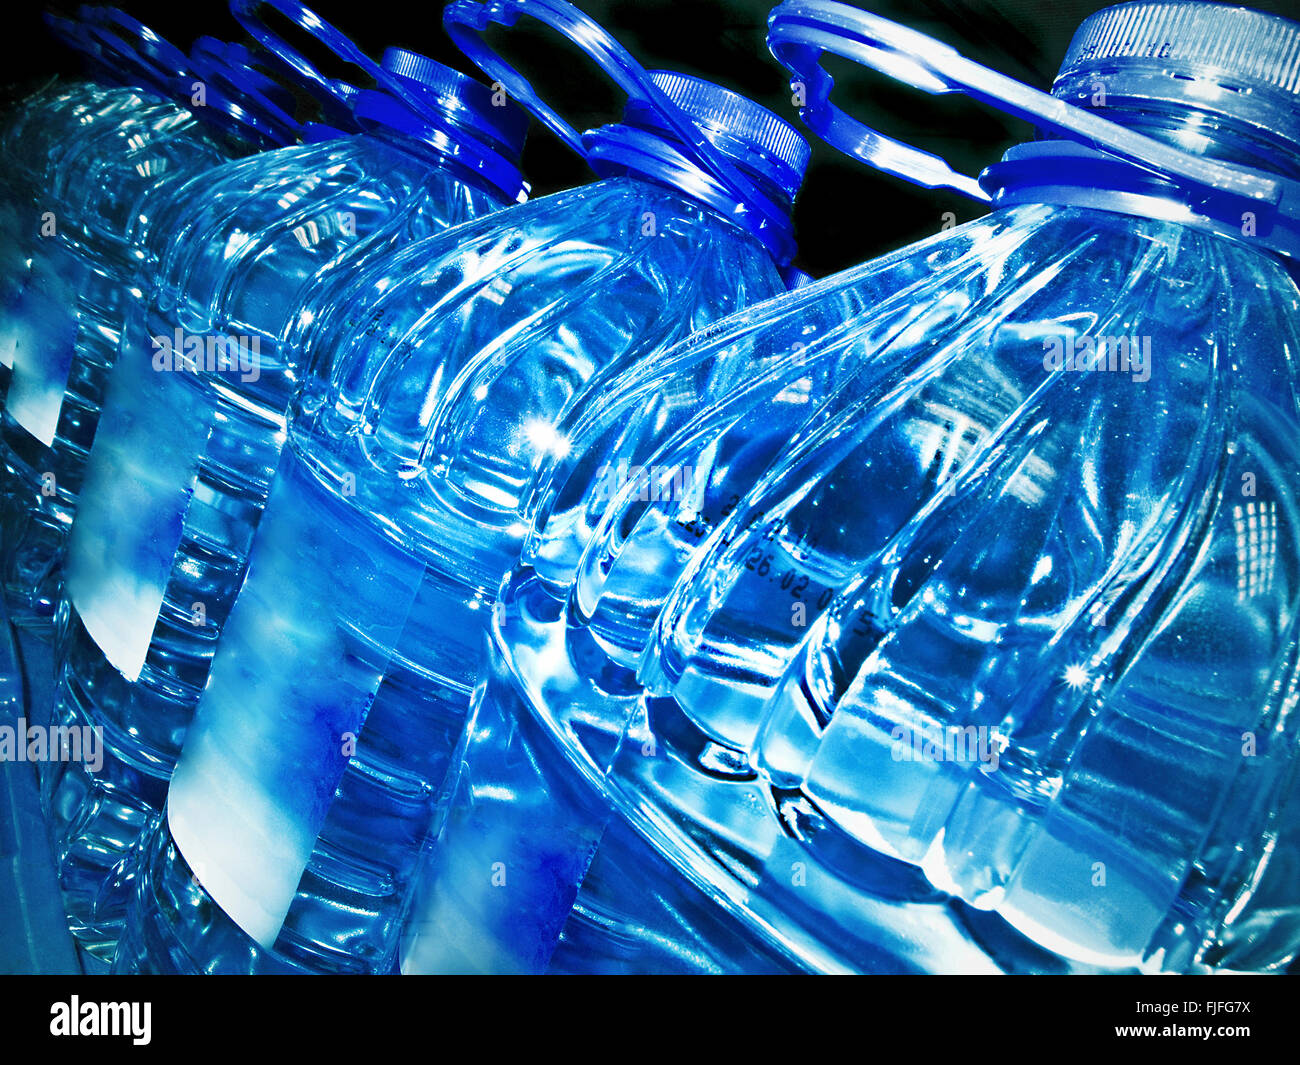 row of the bottled water in dark Stock Photo